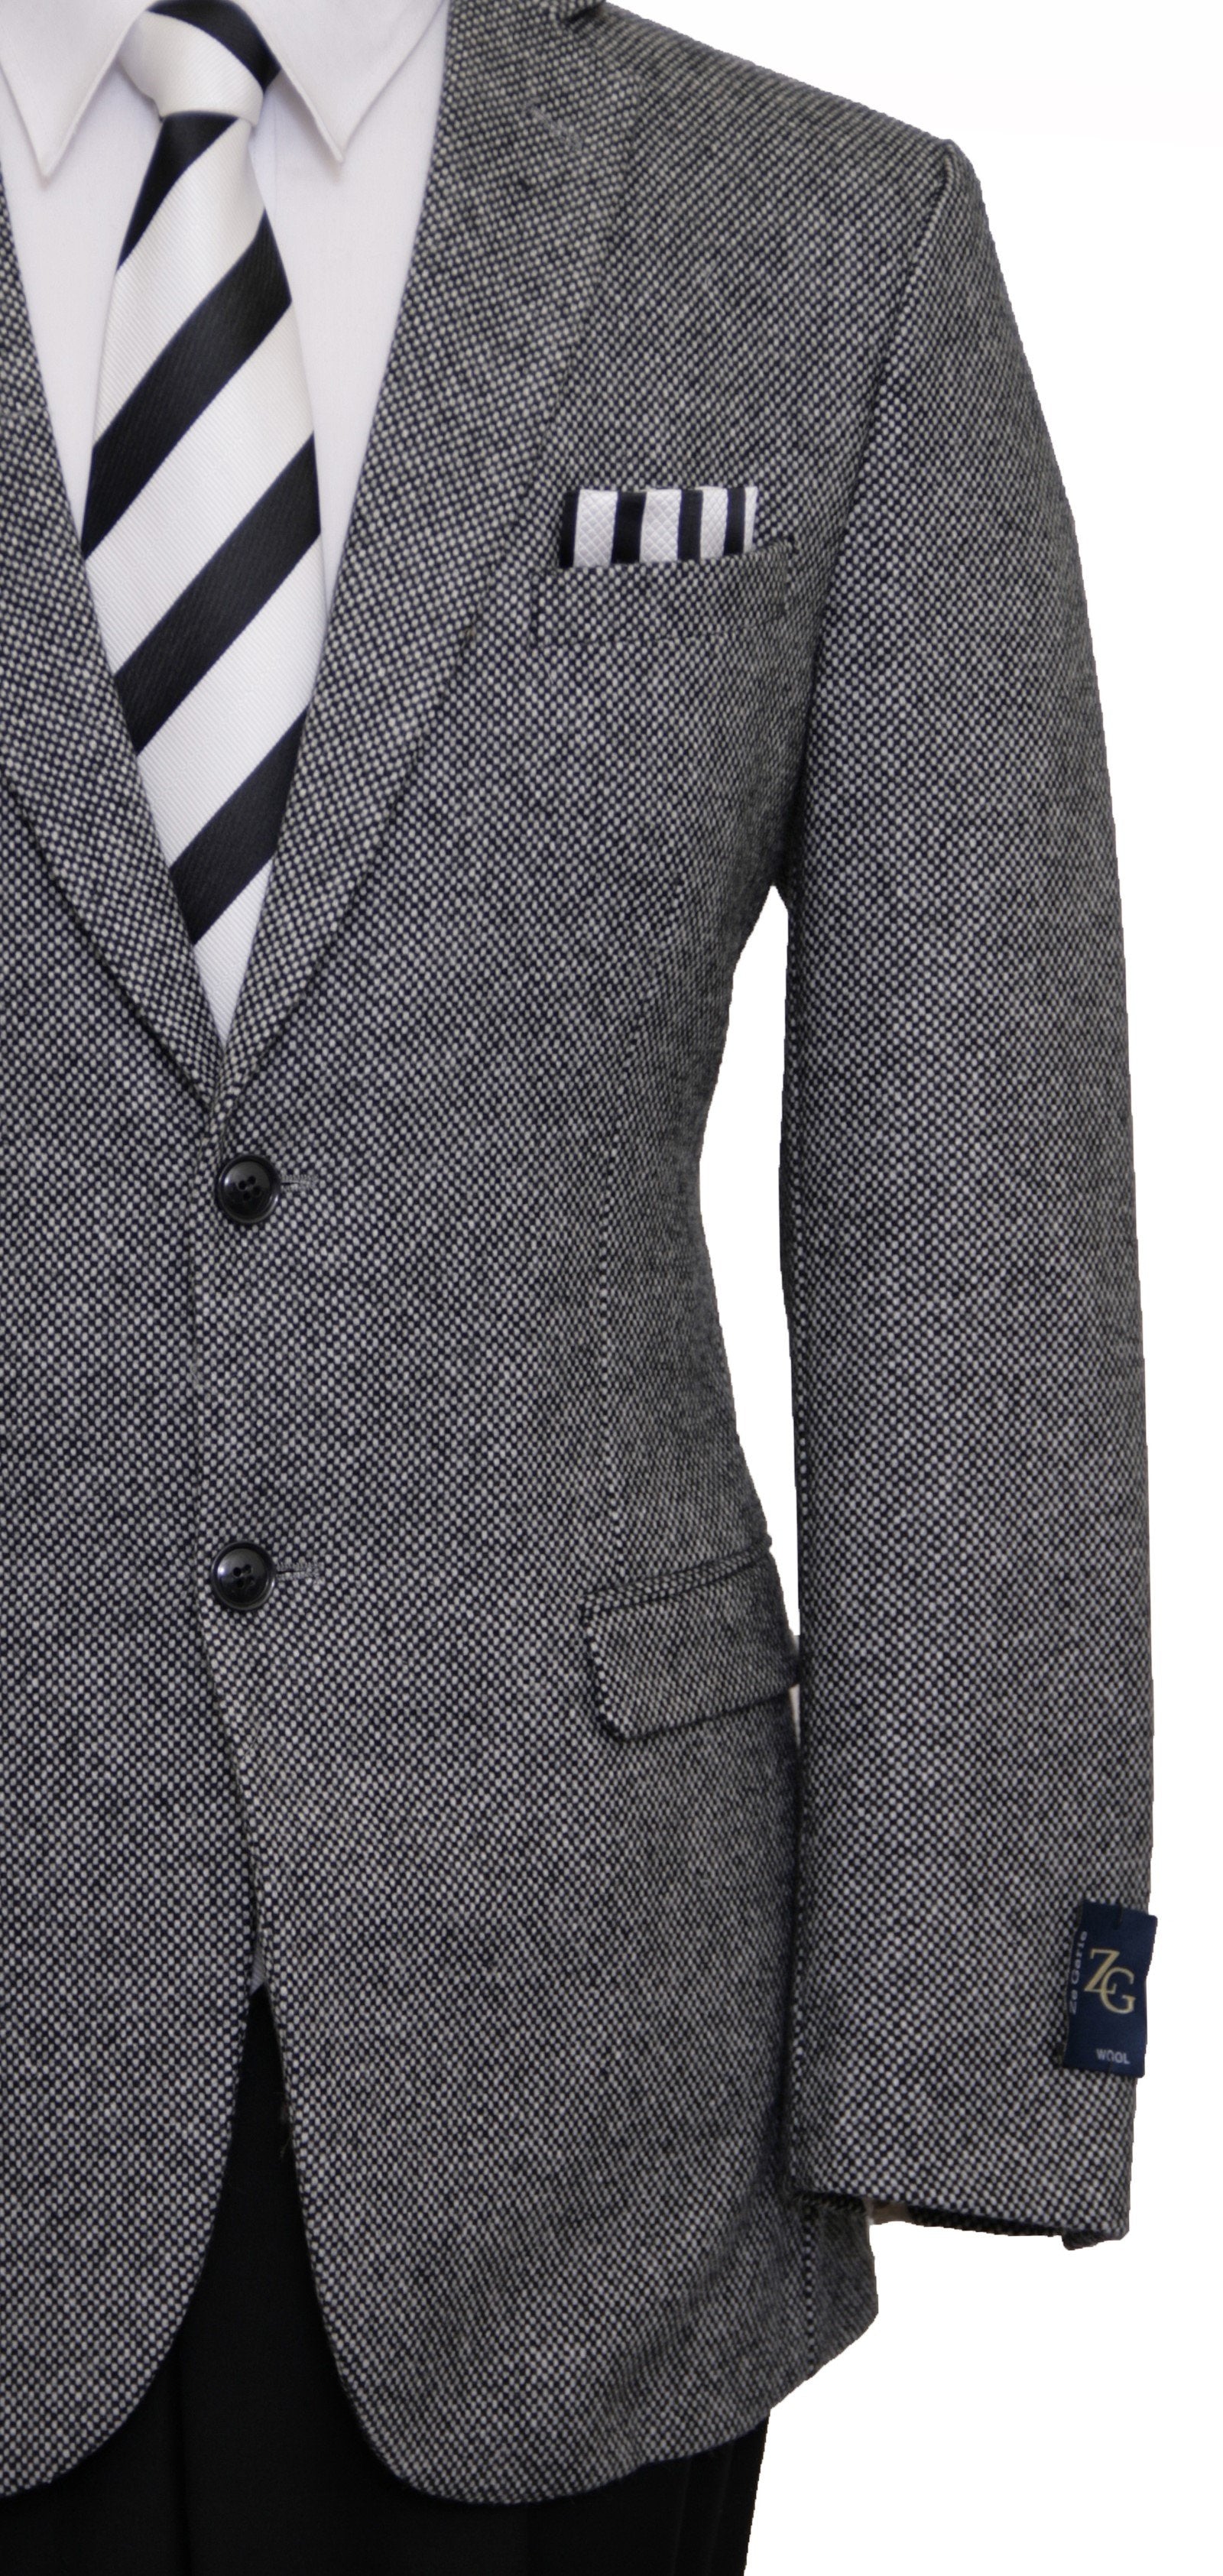 Mens Wool Two Button Solid Textured Notch Lapel Sports Coat Blazer Jacket